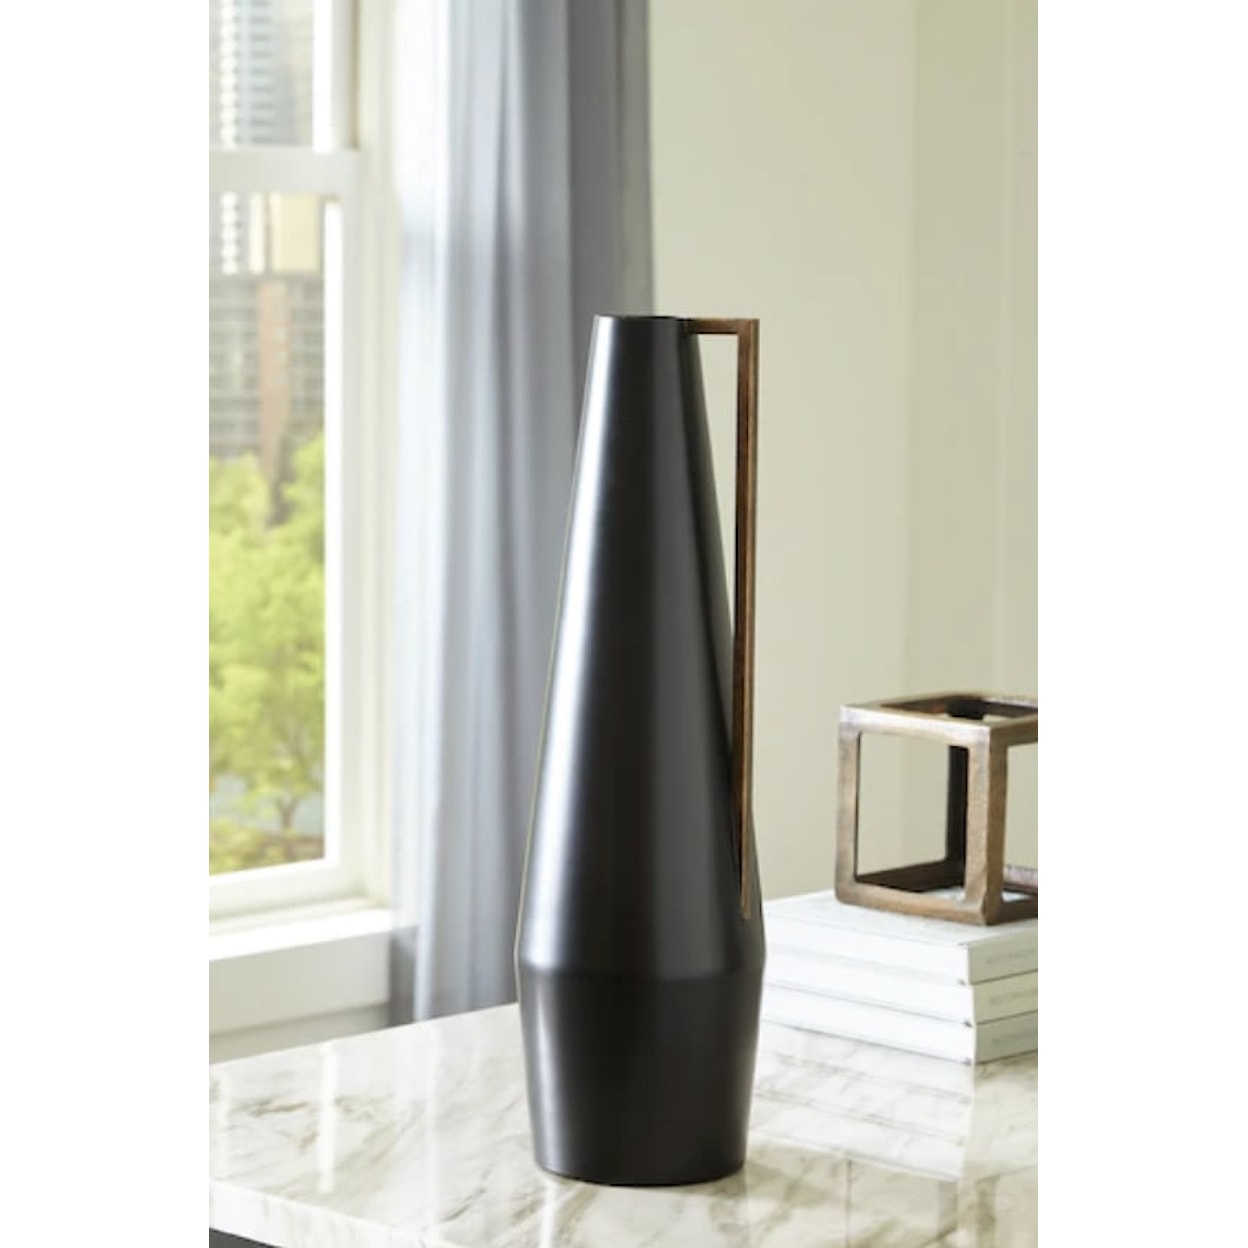 Ashley Furniture Accessories and More Pouderbell Vase